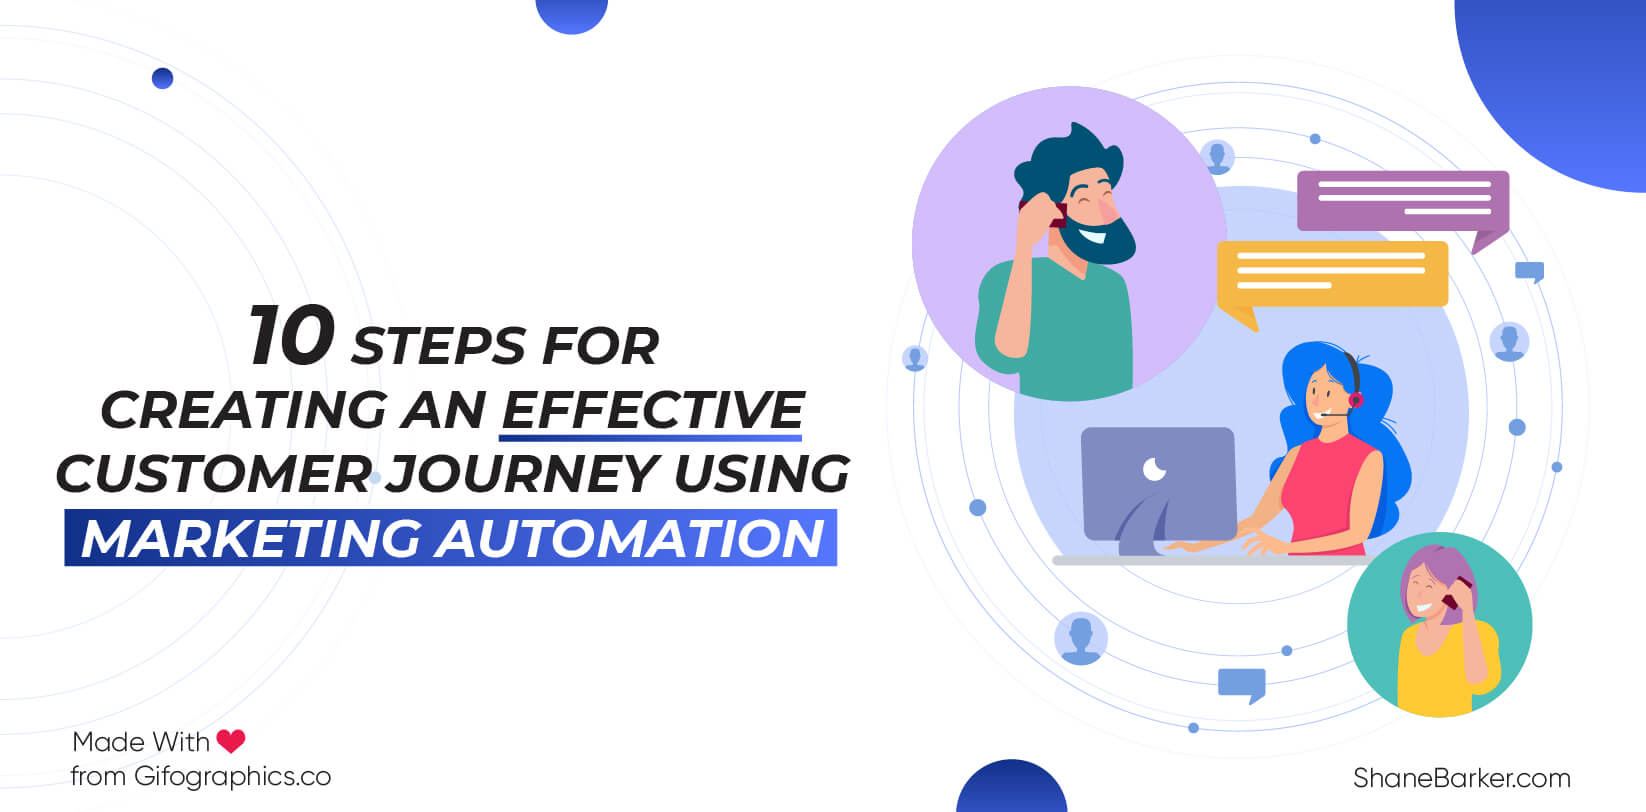 10 Steps for Creating an Effective Customer Journey Using Marketing Automation